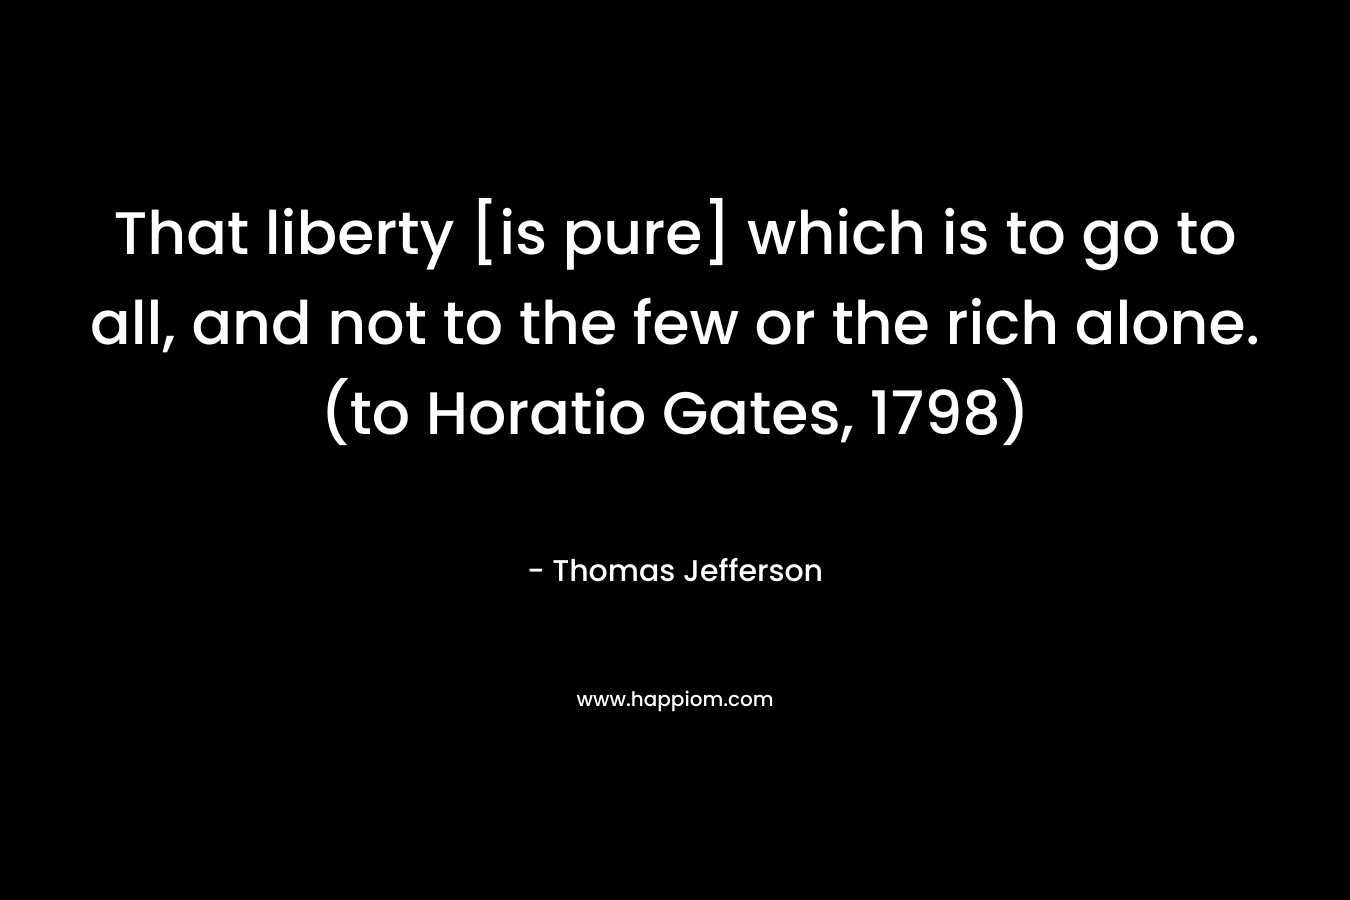 That liberty [is pure] which is to go to all, and not to the few or the rich alone. (to Horatio Gates, 1798) – Thomas Jefferson